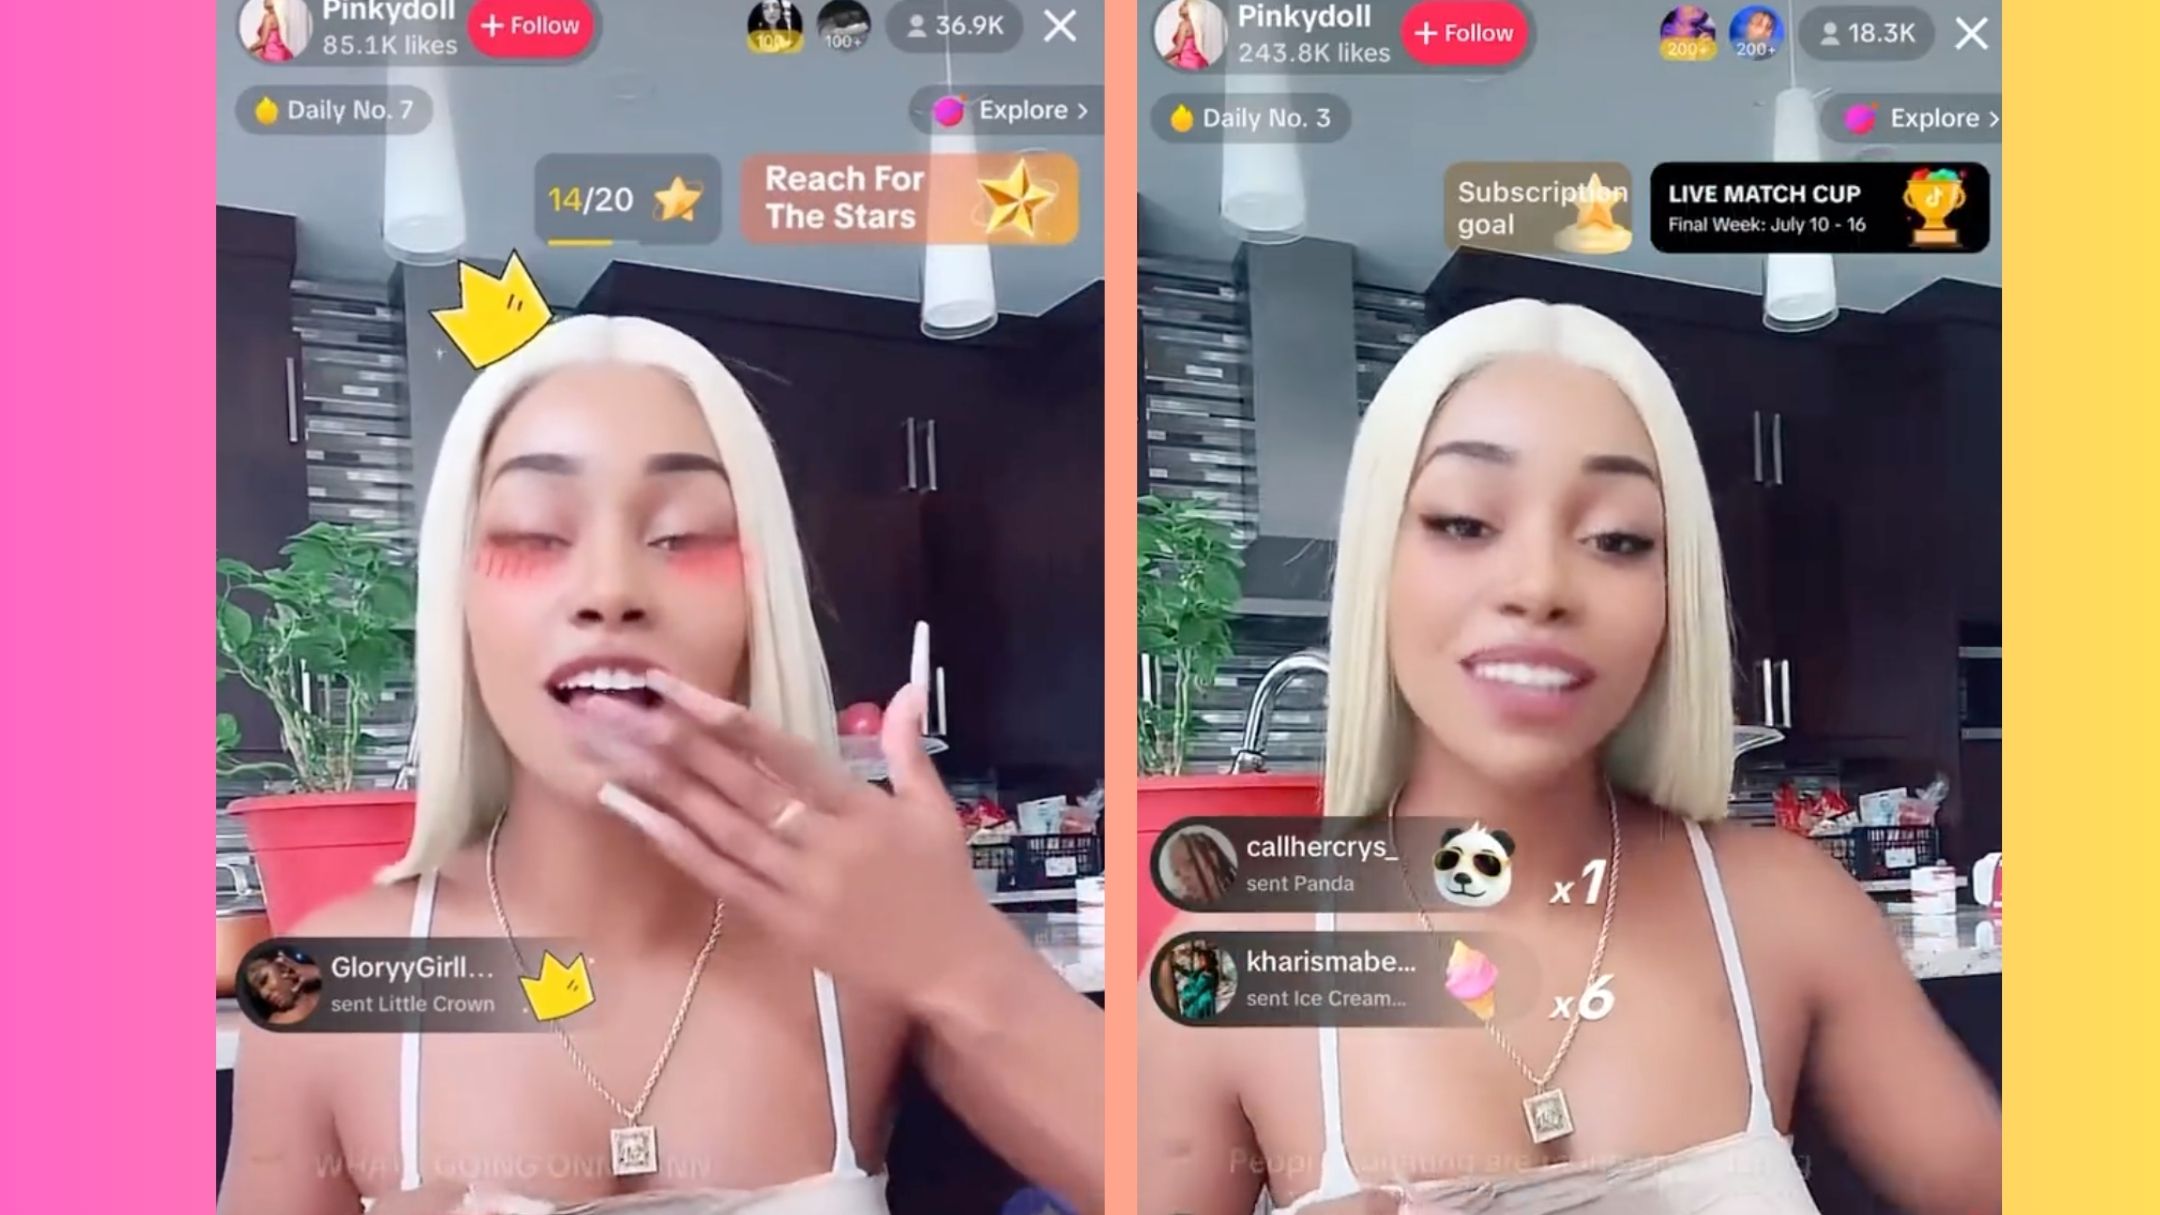 NPC Streamer On Tik Tok Are Getting Rich - What Is This Trend? 